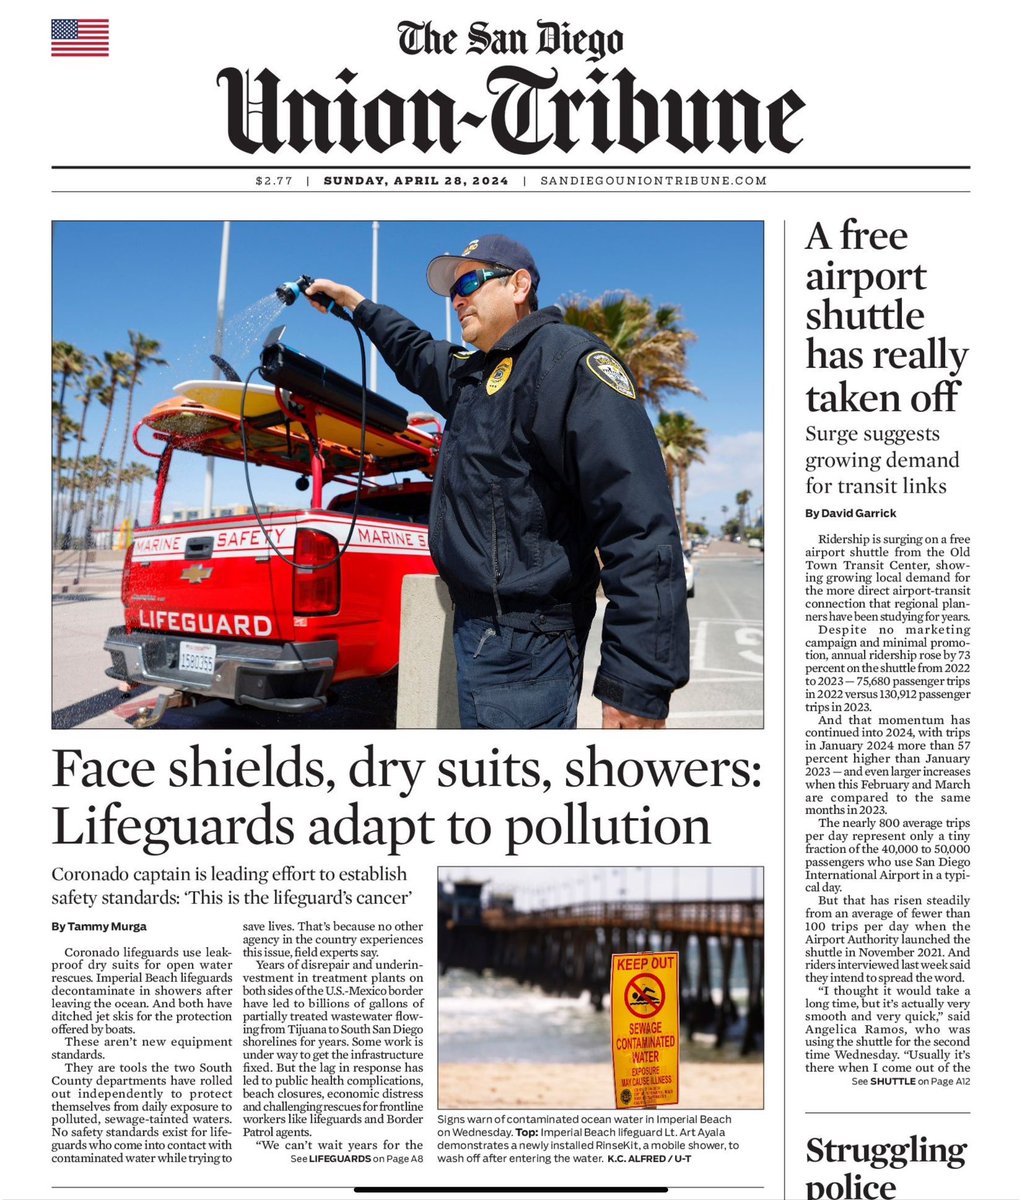 Once again the @sdut @tammyxmurga get to the heart of the devastating impacts of Tijuana’s sewage/toxic waste crisis and lack of legal accountability. Our lifeguards in @CityofIB and @CoronadoCity are paying the price for CA and the U.S. for failing to push hard to fix this.